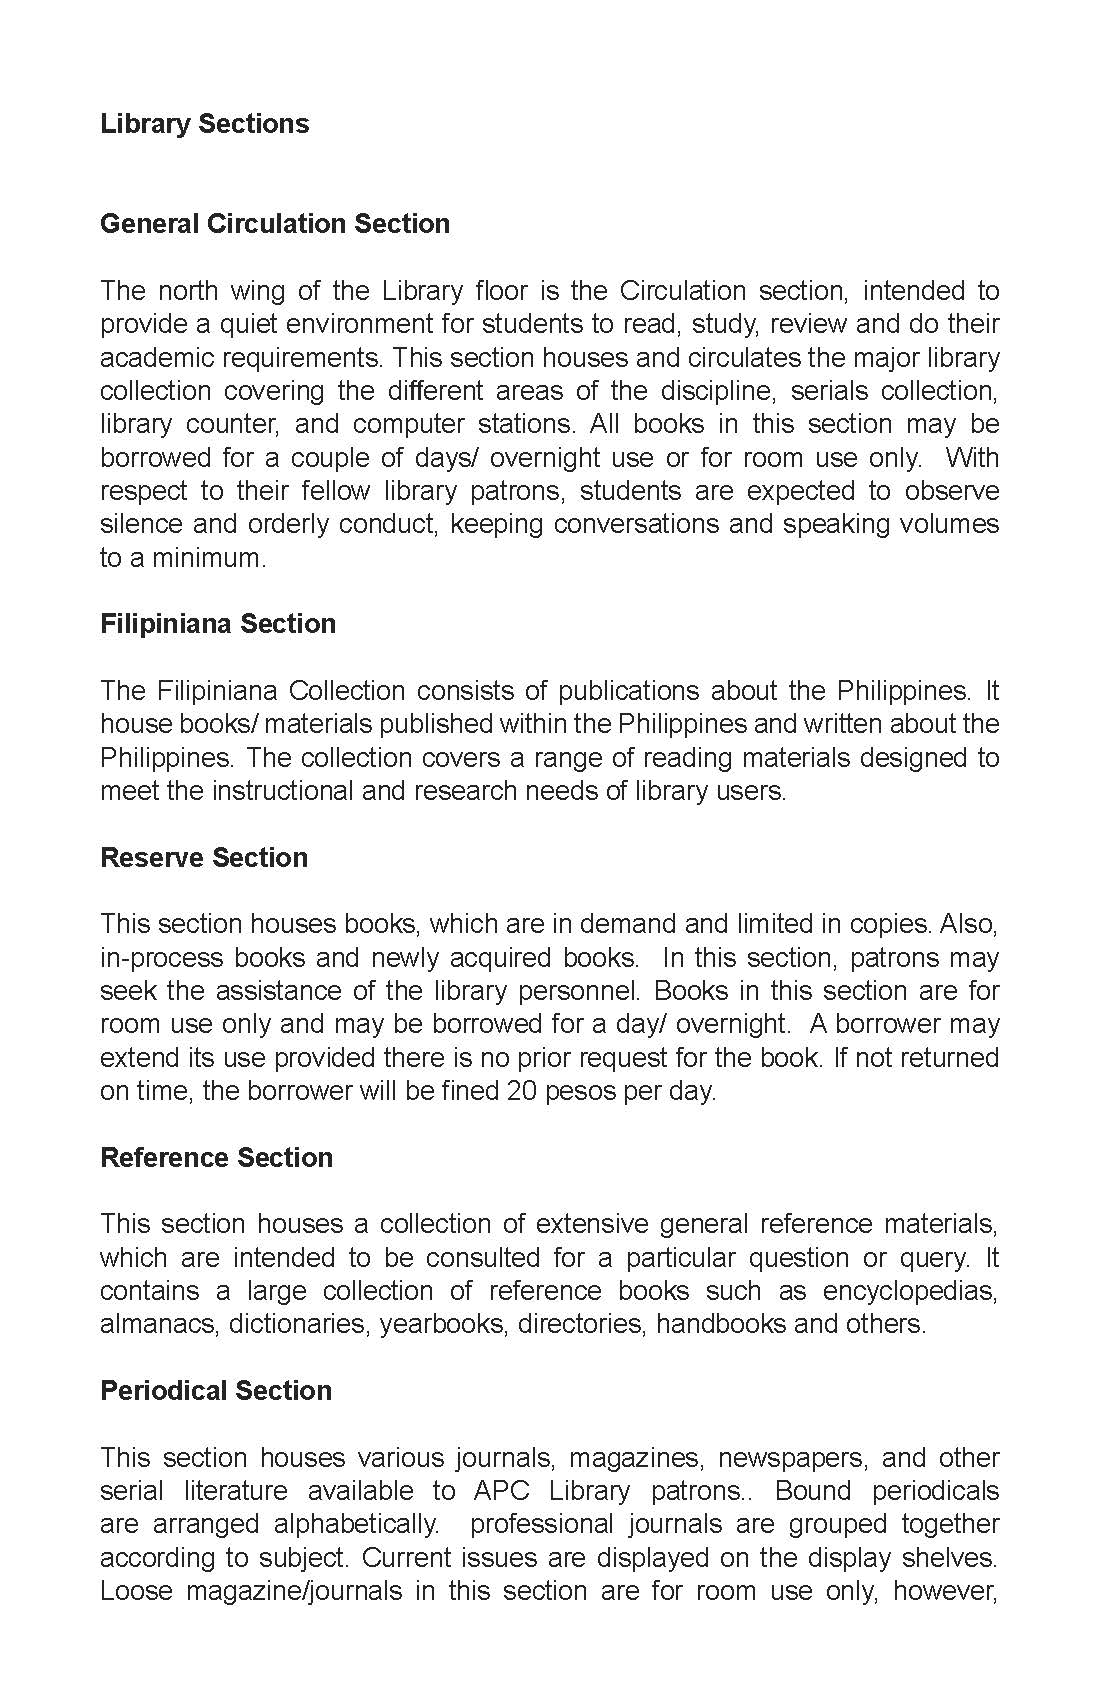 Library Playbook_Page_04